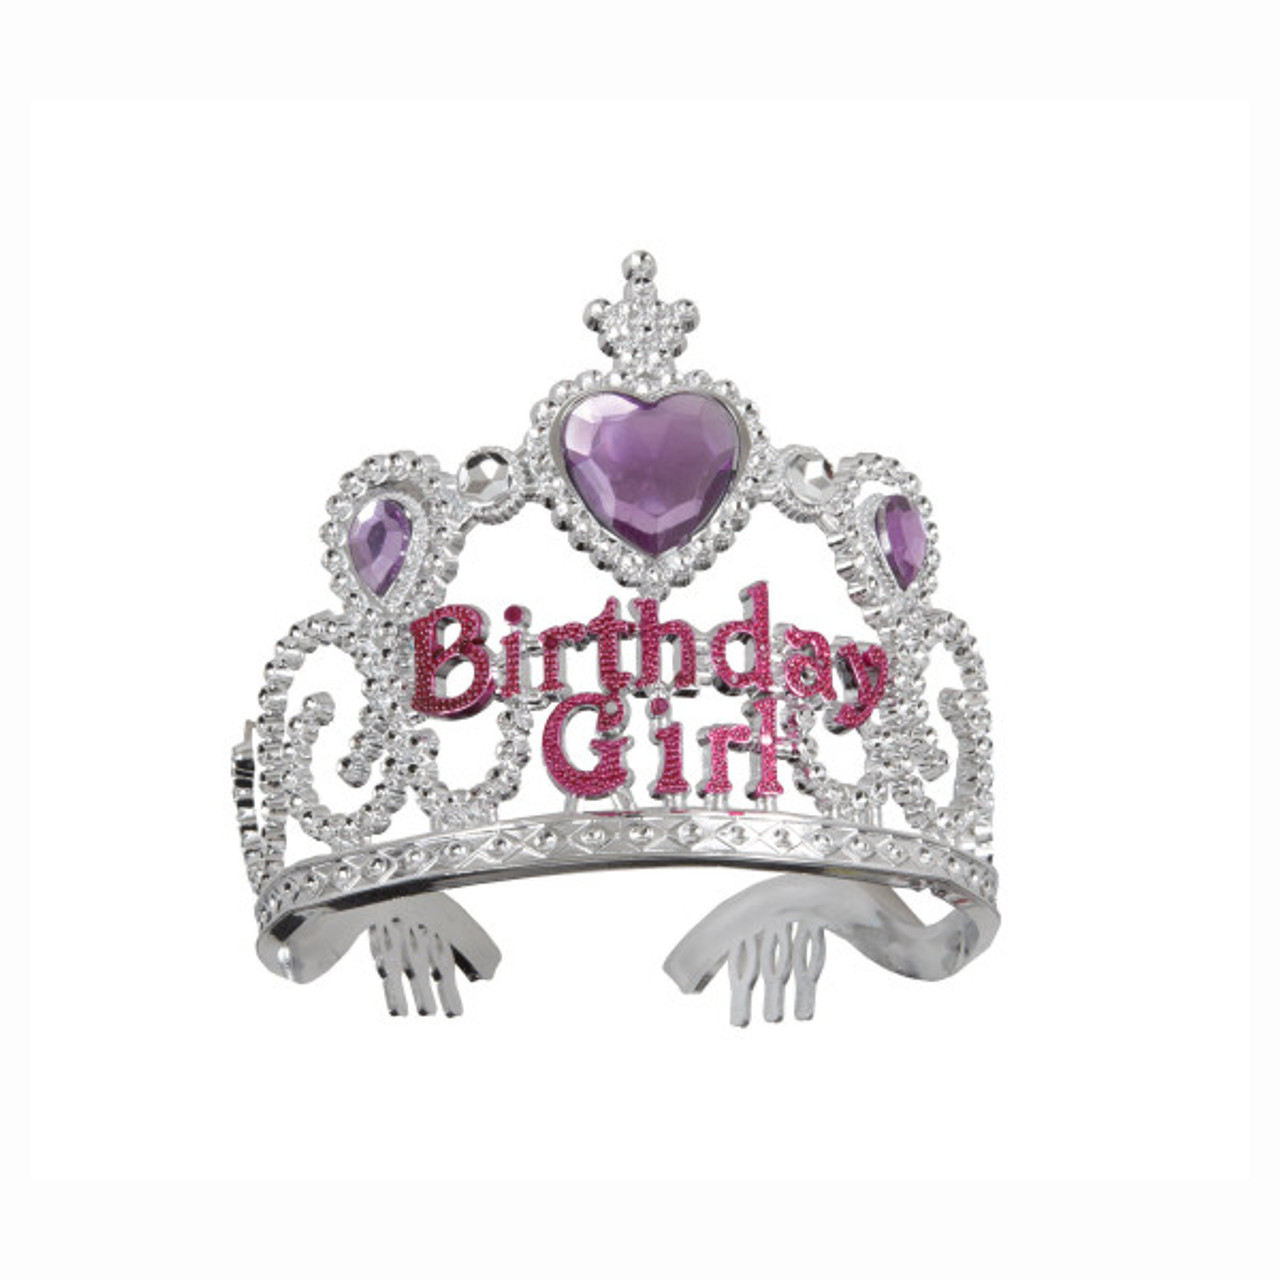 Silver Plastic Jeweled Queen's Tiara 